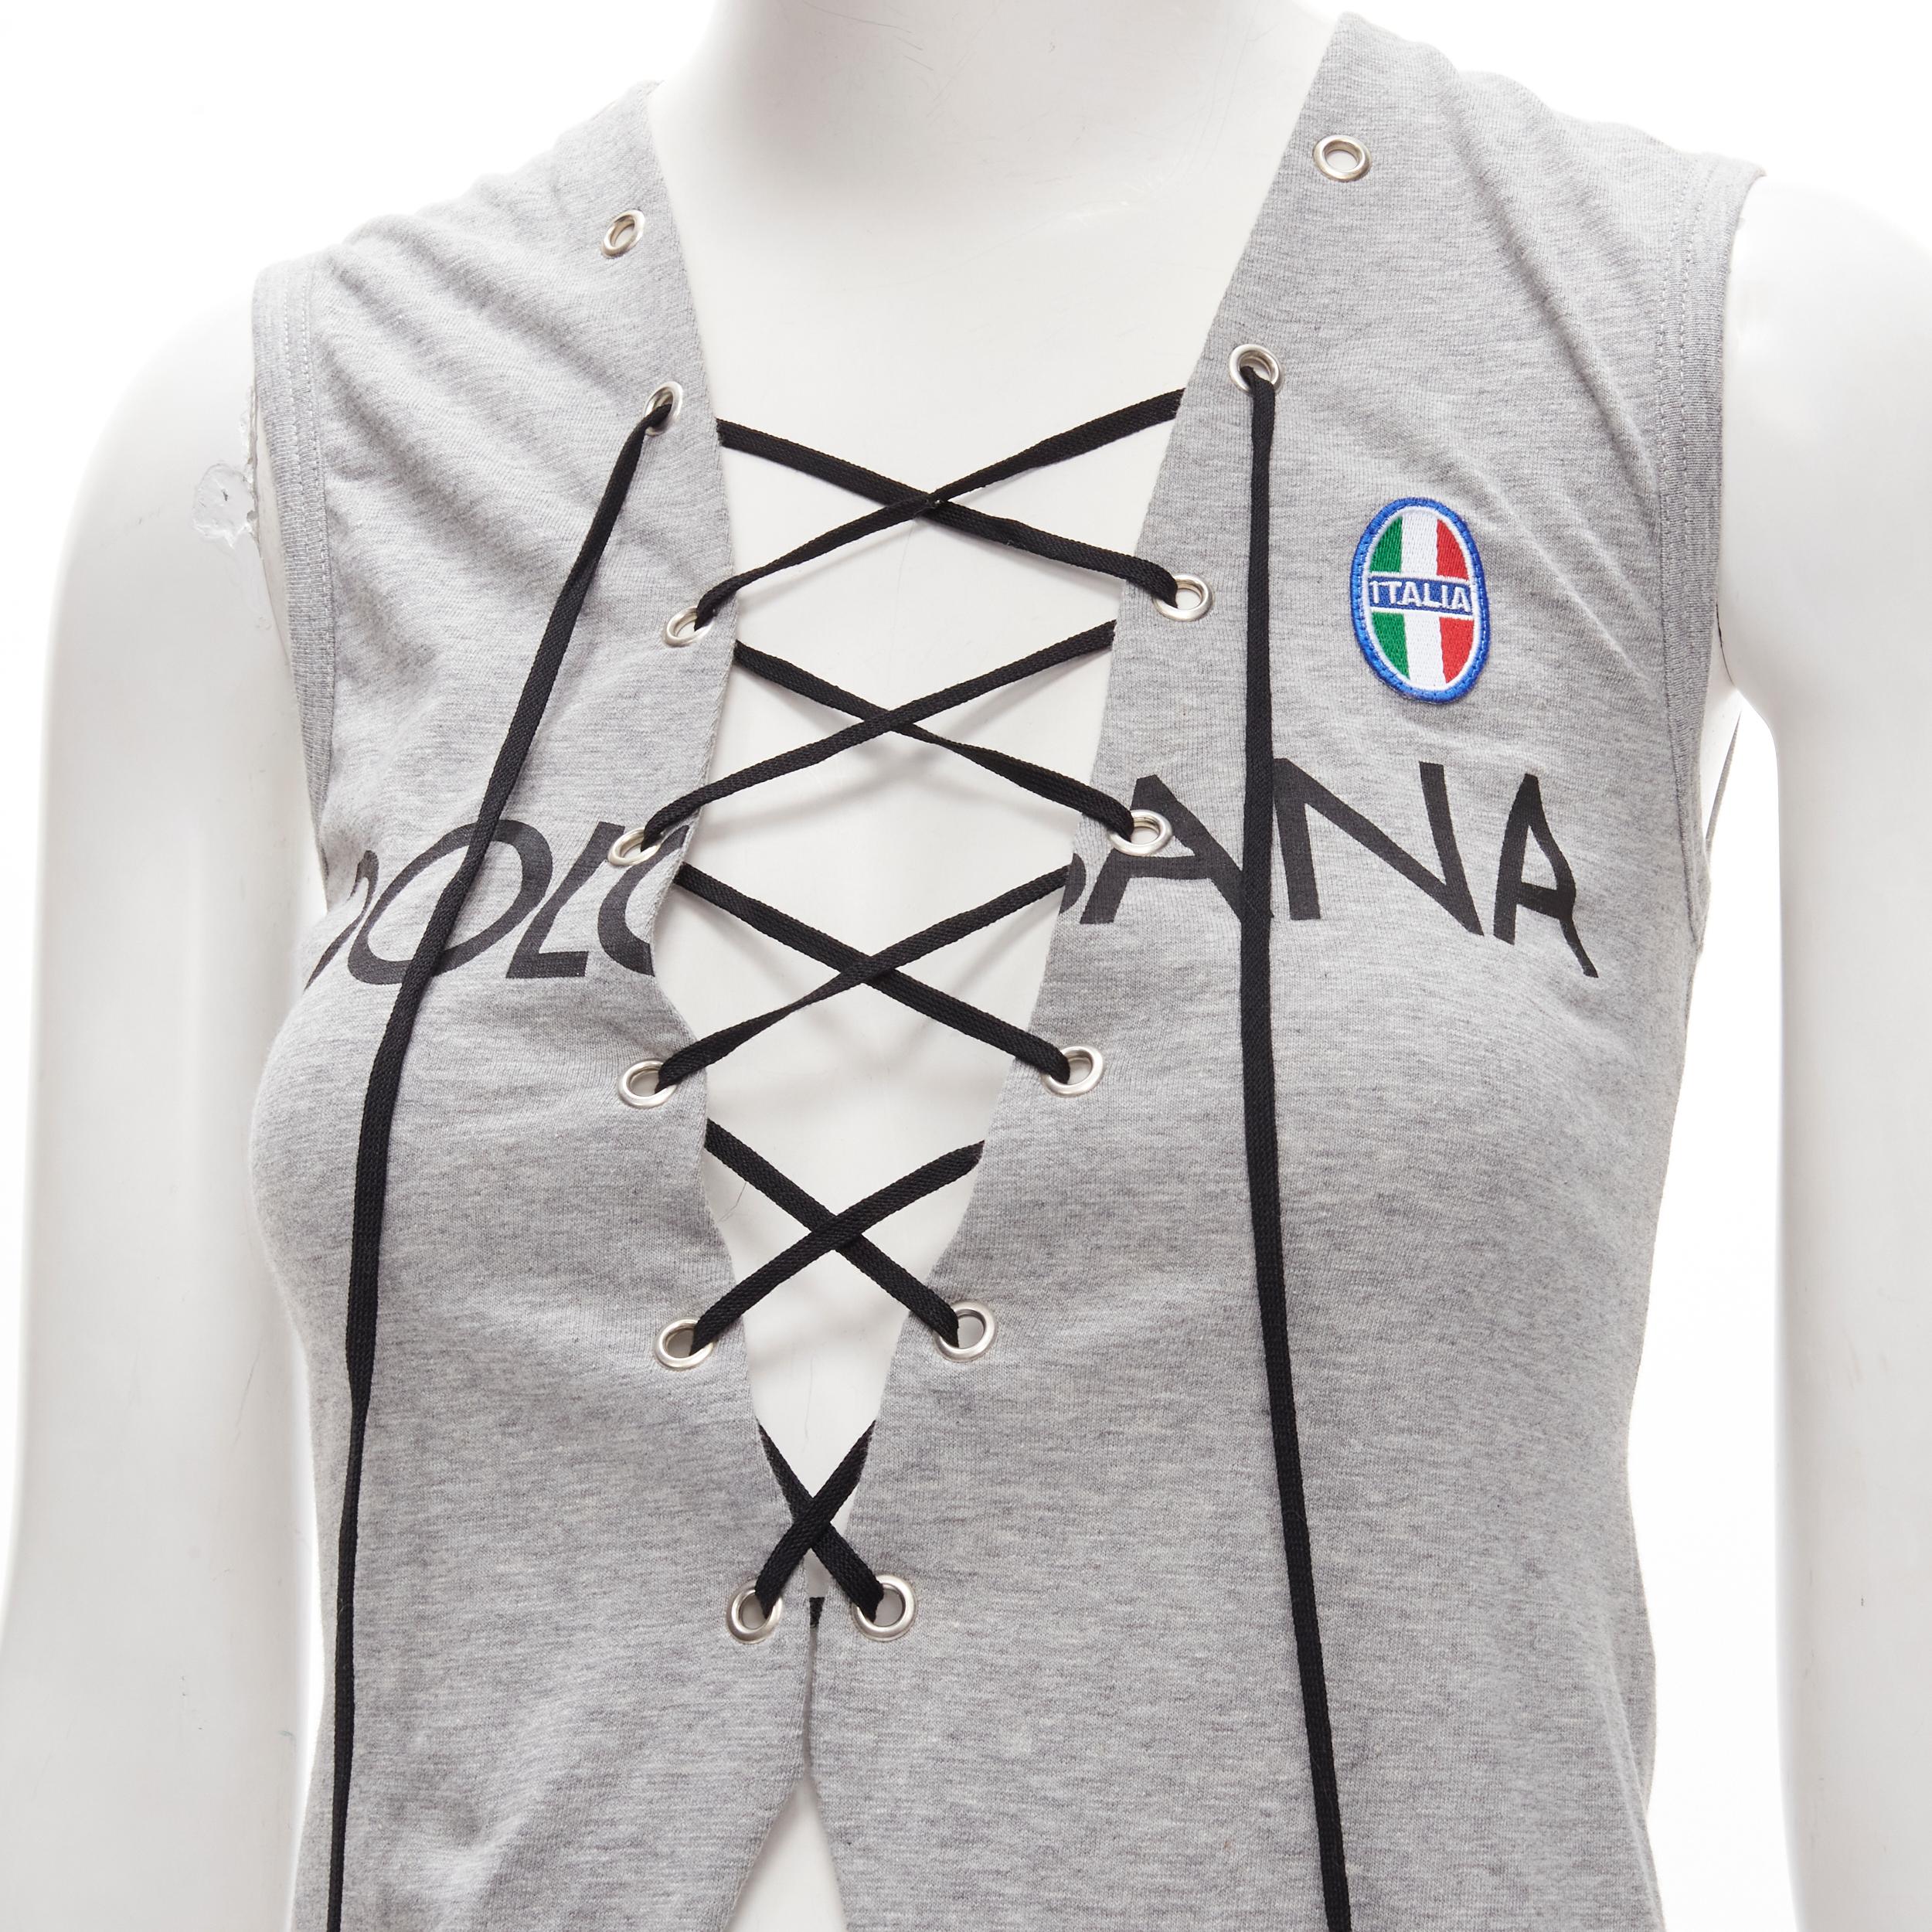 DOLCE GABBANA Vintage Y2K grey logo lace up tank top IT38 XS Kim Kardashian 
Reference: ANWU/A00621 
Brand: Dolce Gabbana 
As seen on: Kim Kardashian 
Material: Cotton 
Color: Grey 
Pattern: Solid 
Closure: Lace Up
Extra Detail: Silver-tone grommet